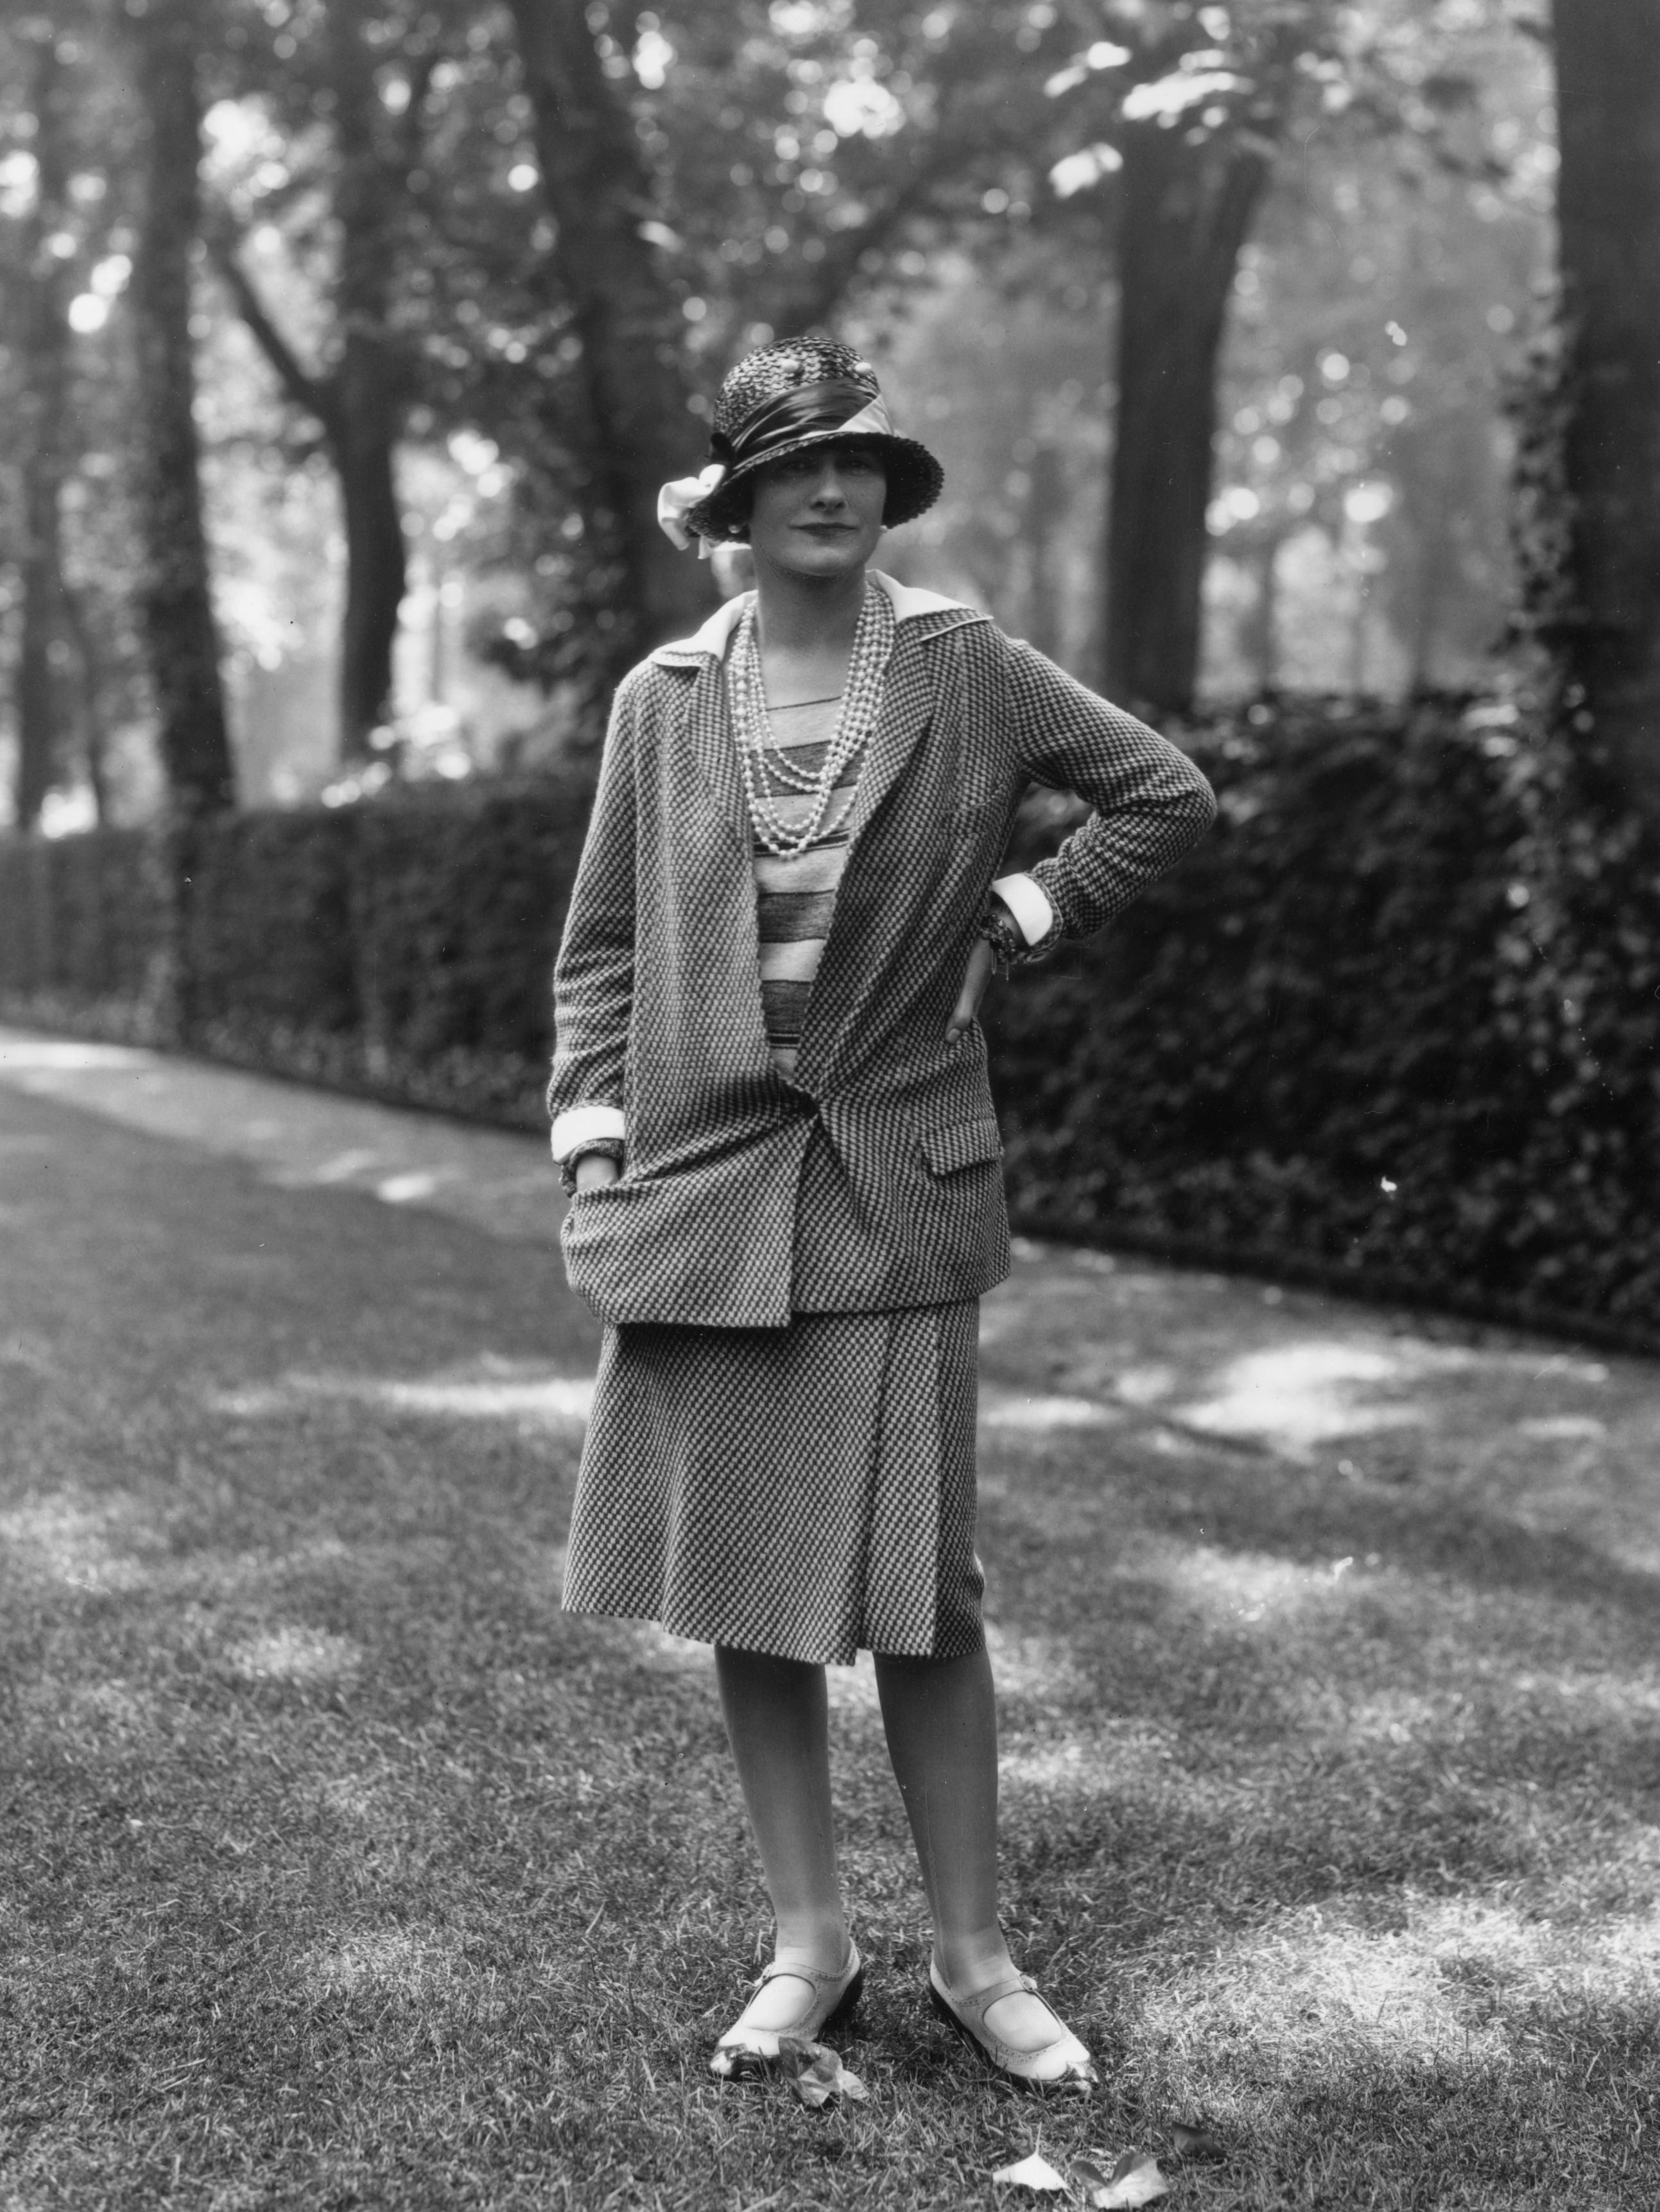 From Elegant Fashion to the Iconic Chanel No. 5 Fragrance: Coco Chanel's  Legacy and Net Worth